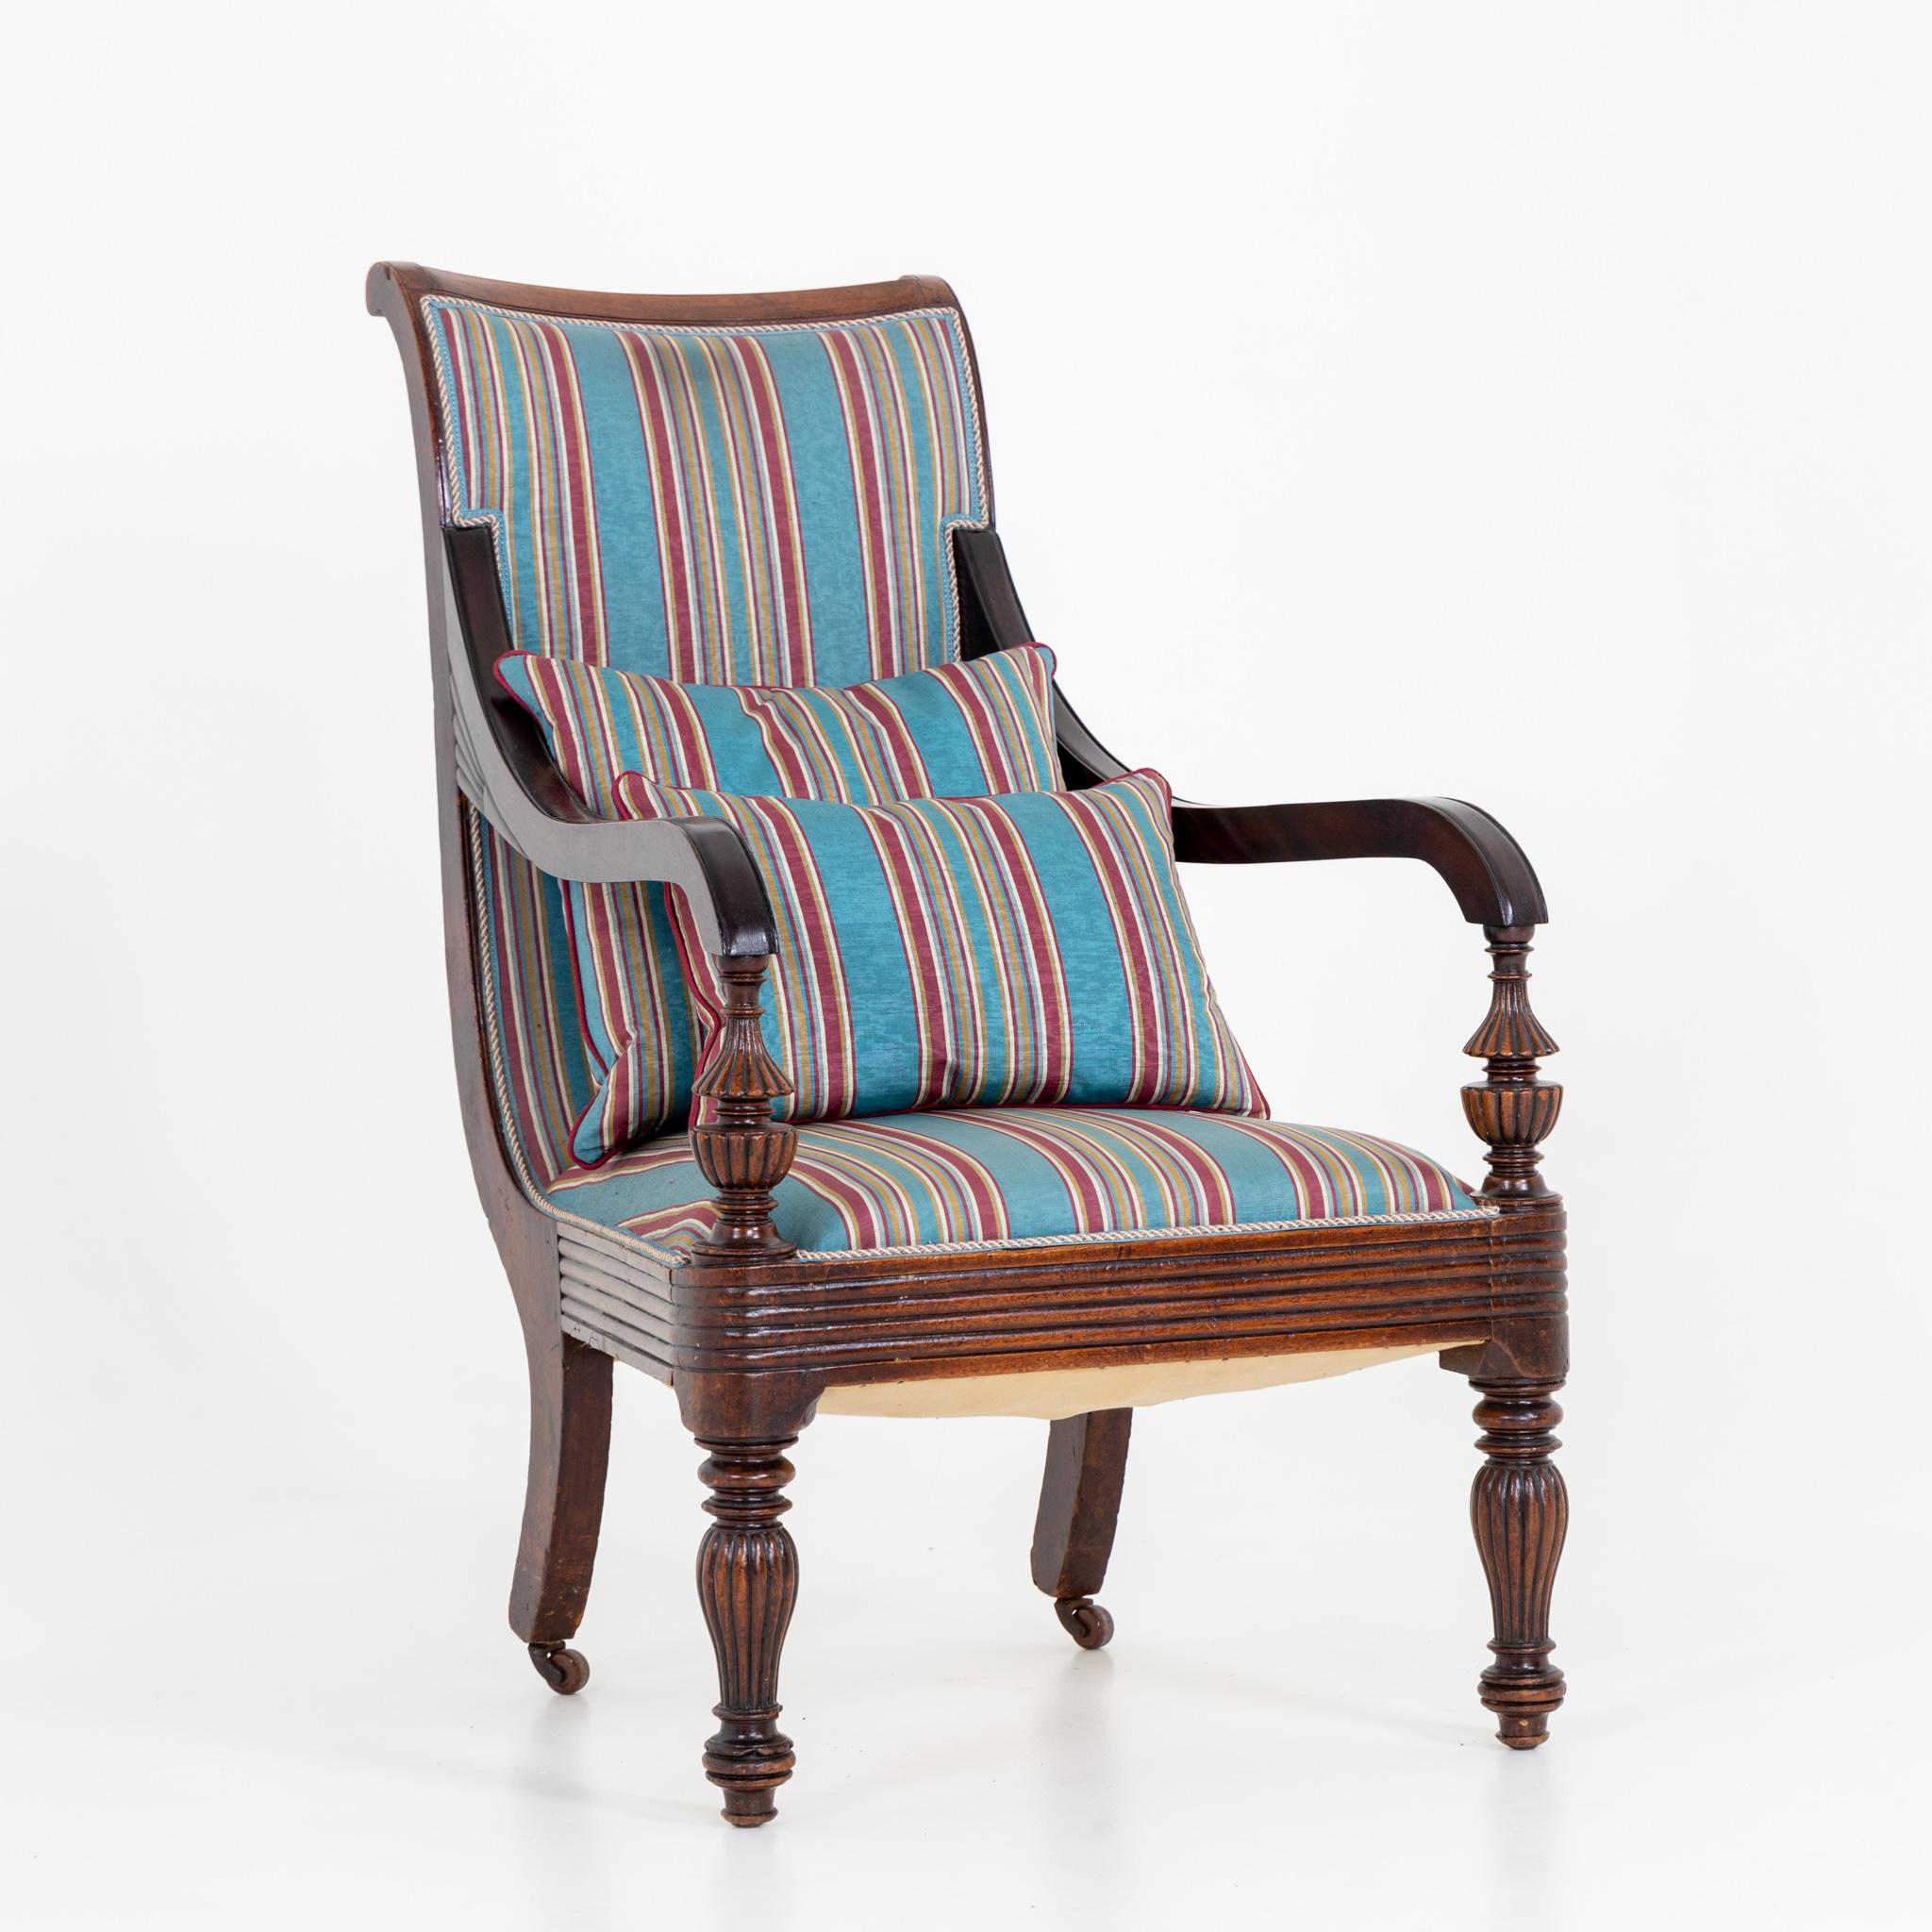 English mahogany armchair with striped upholstery. The rear legs are on brass castors.